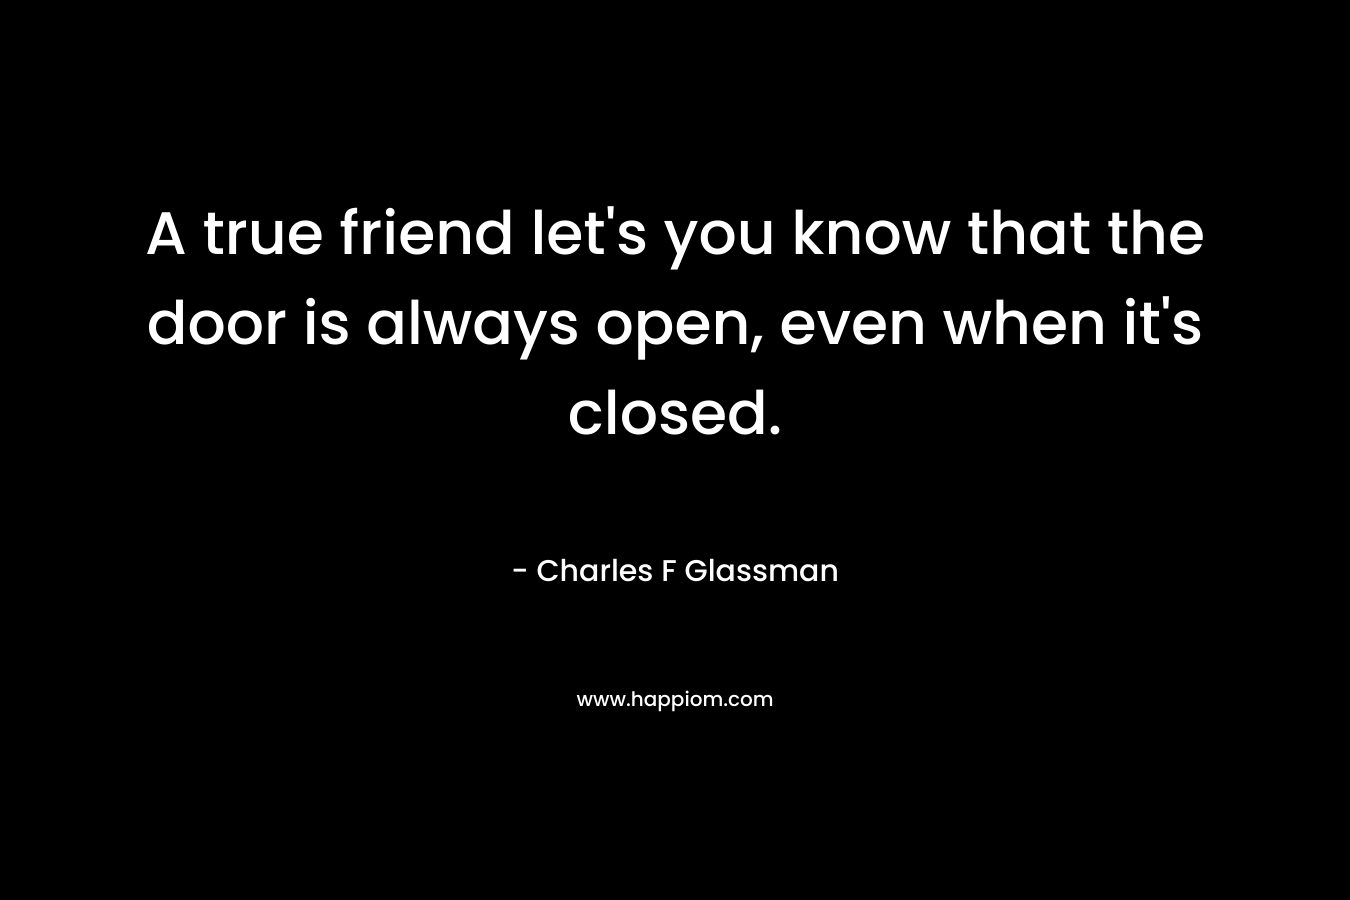 A true friend let's you know that the door is always open, even when it's closed.